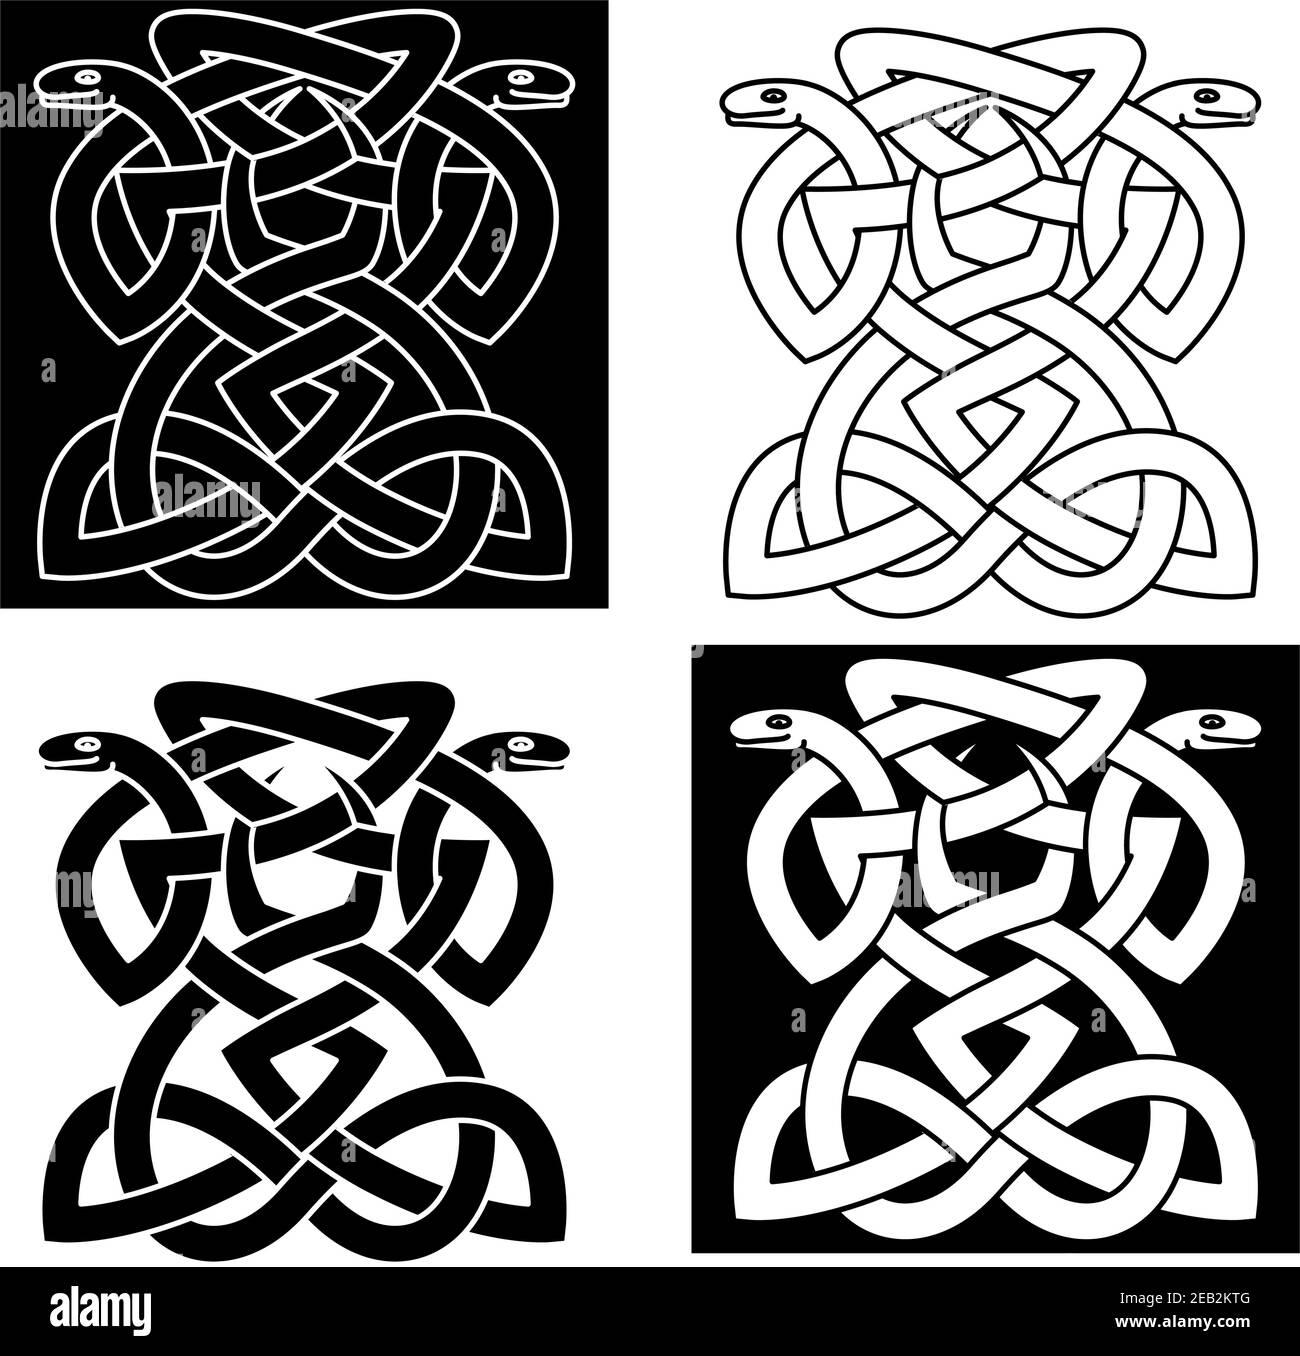 Intricate intertwined snakes emblems forming a geometric pattern in different variations for elegant tattoo or art Stock Vector